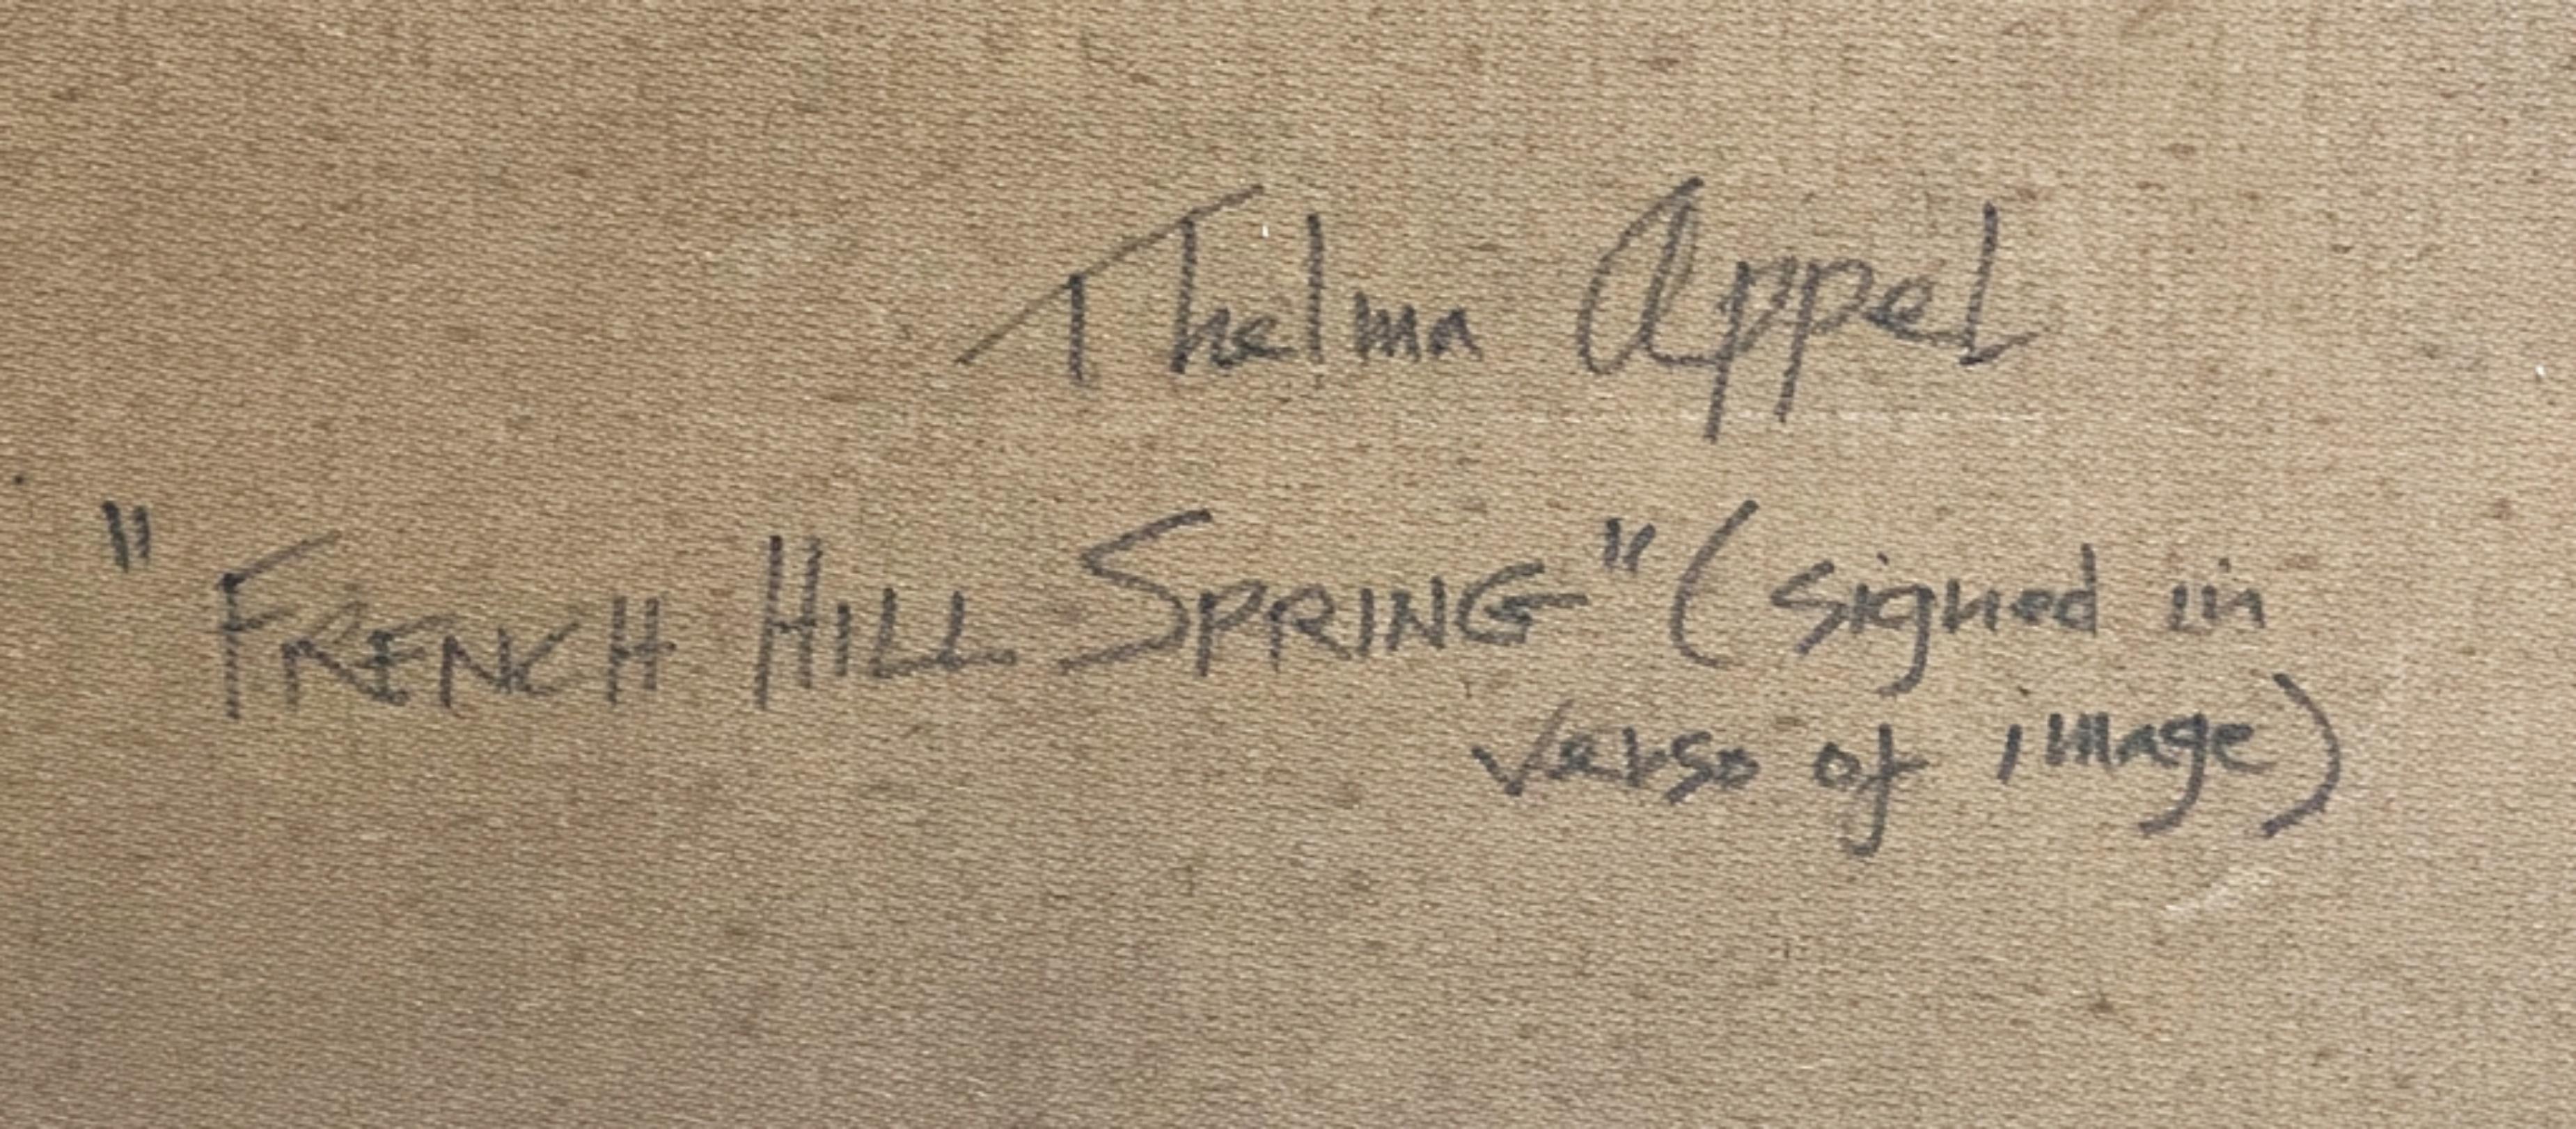 Thelma Appel French Hill Spring 3